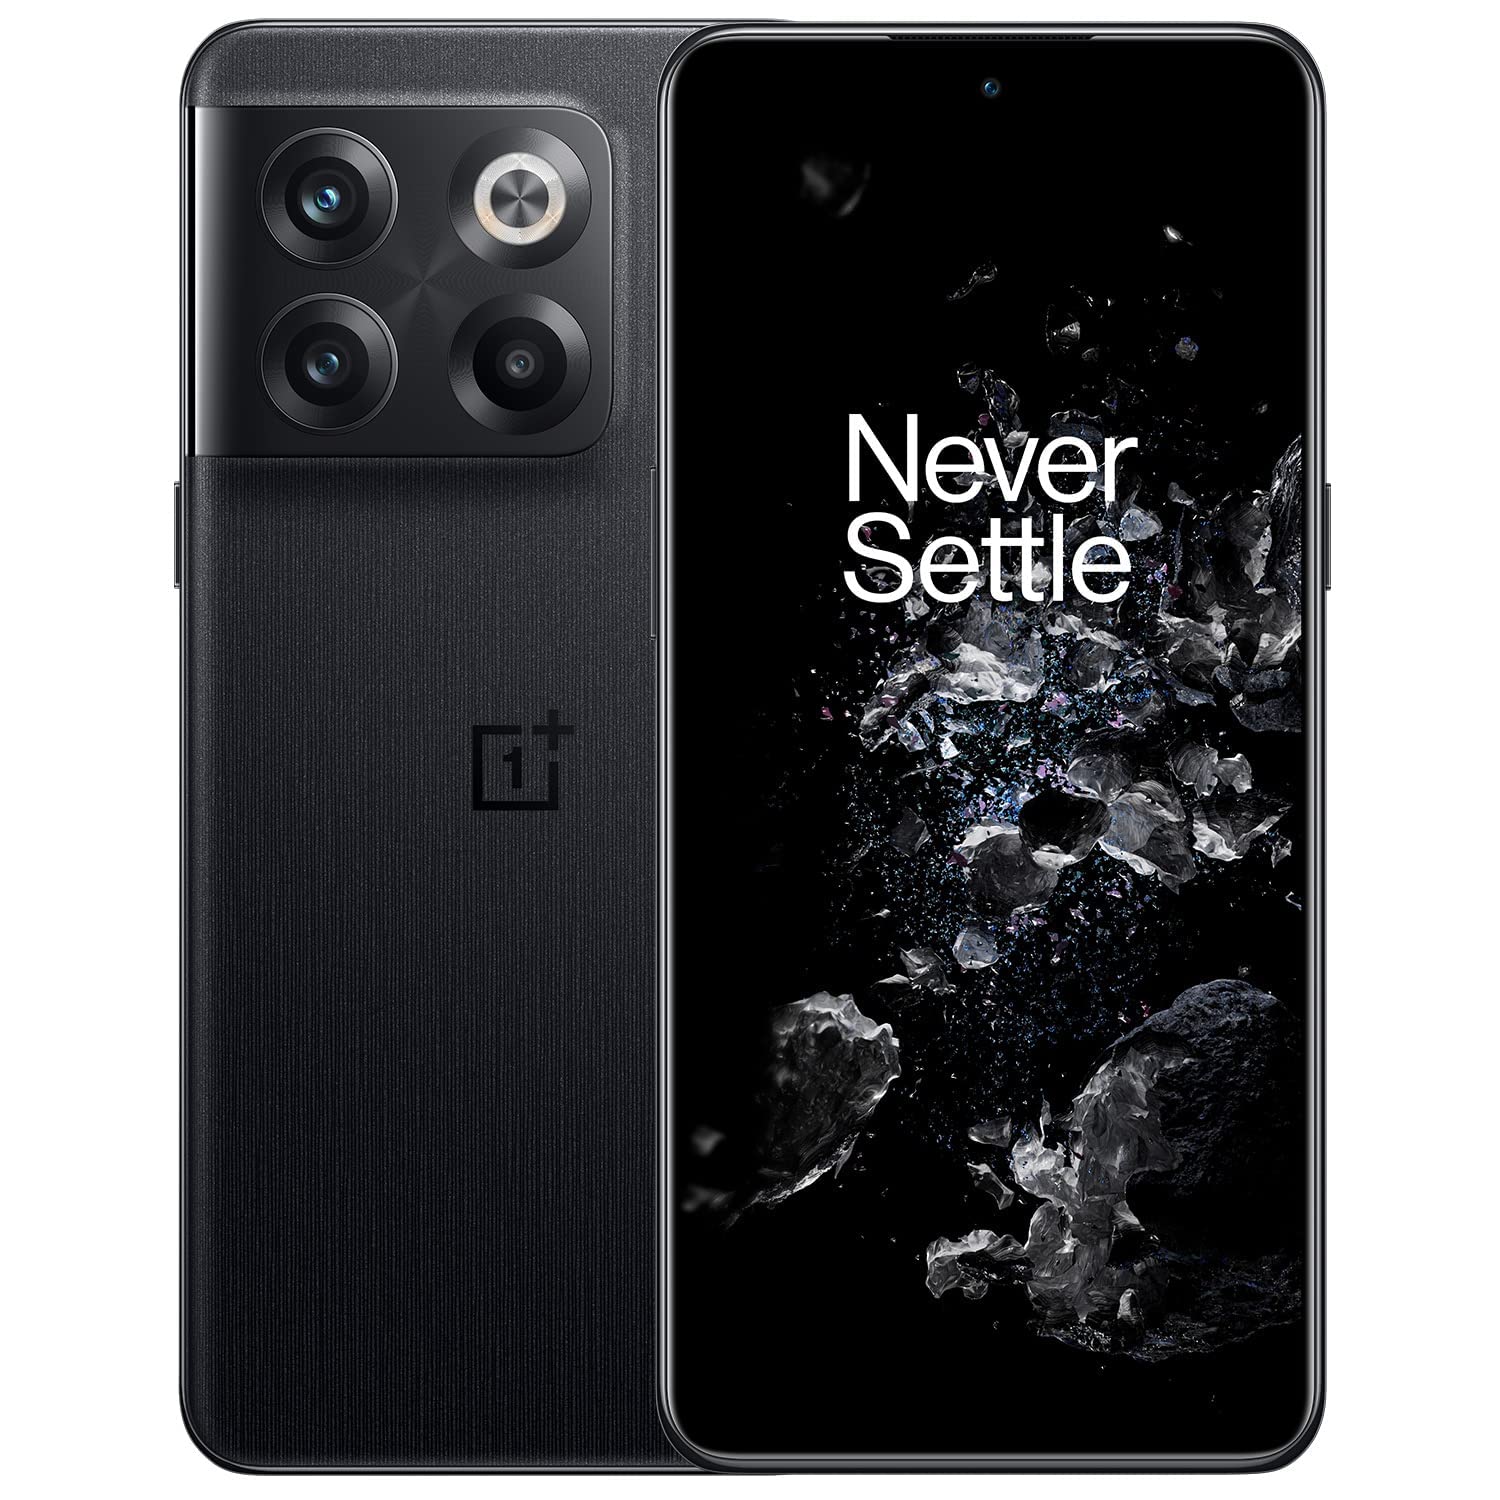 oneplus-10t-to-be-the-first-oneplus-phone-with-16gb-of-ram